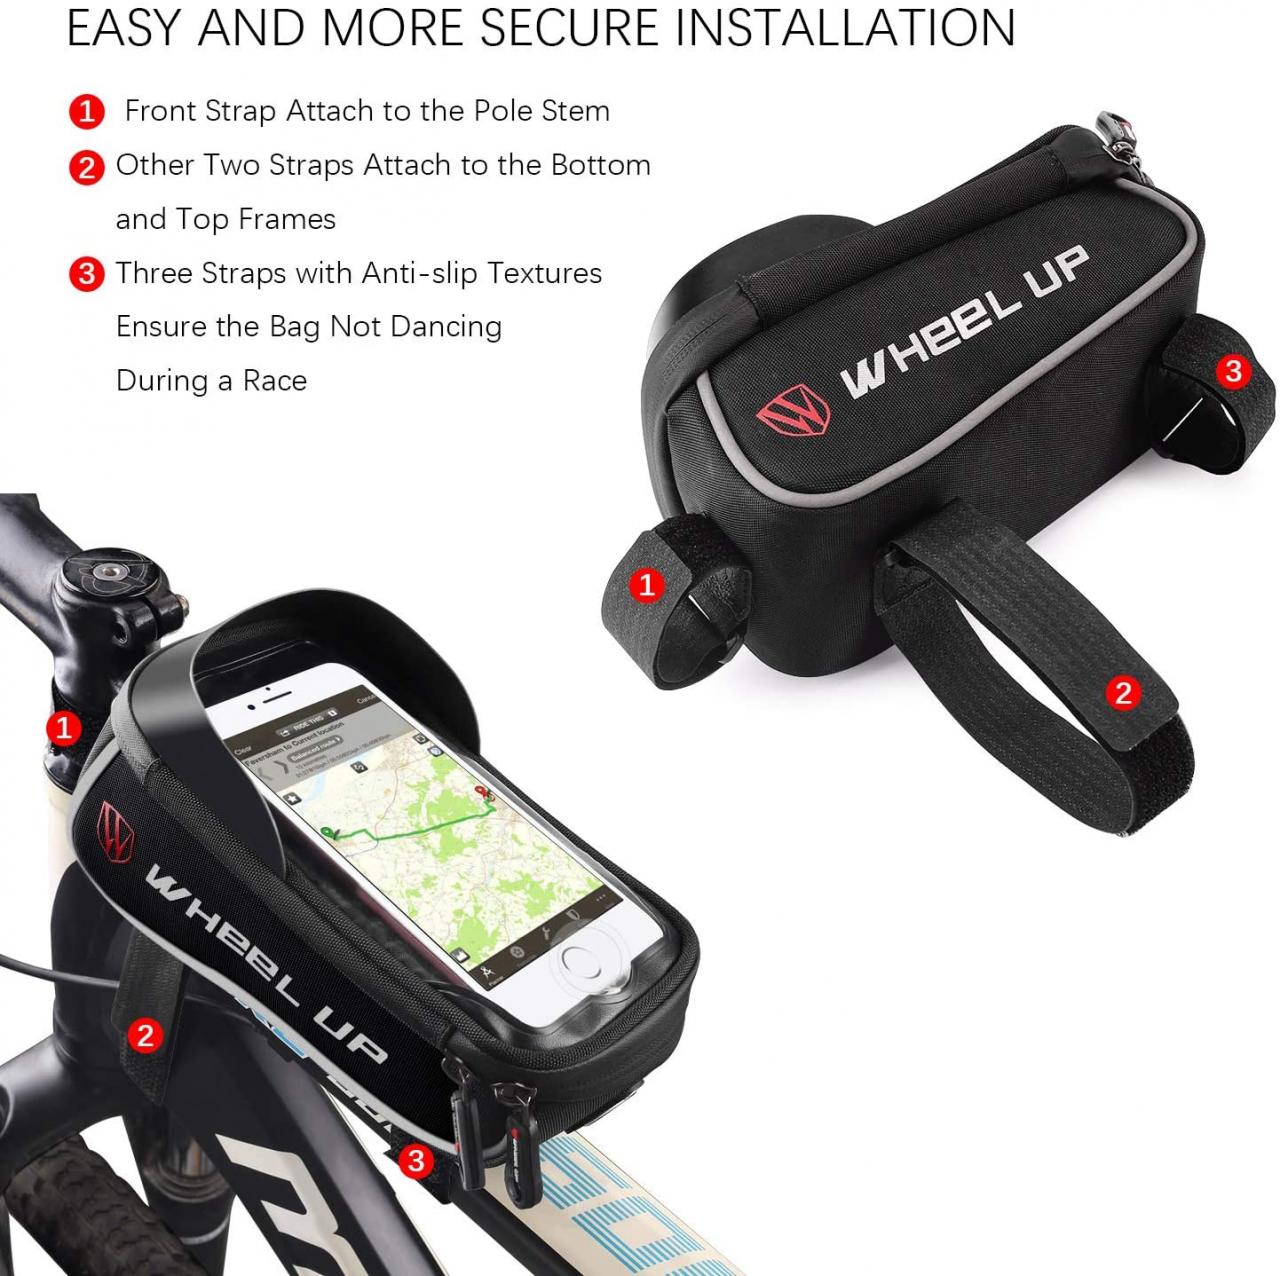 Buy FlexDin Bike Frame Bag Waterproof Top Tube Bicycle Bag Touch-ID Unlock  Cell Phone Holder Mount with Full-Size Rain Cover for iPhone XS/7/8 Plus  Huawei Samsung Galaxy Online in Turkey. B07R4LPQ4L